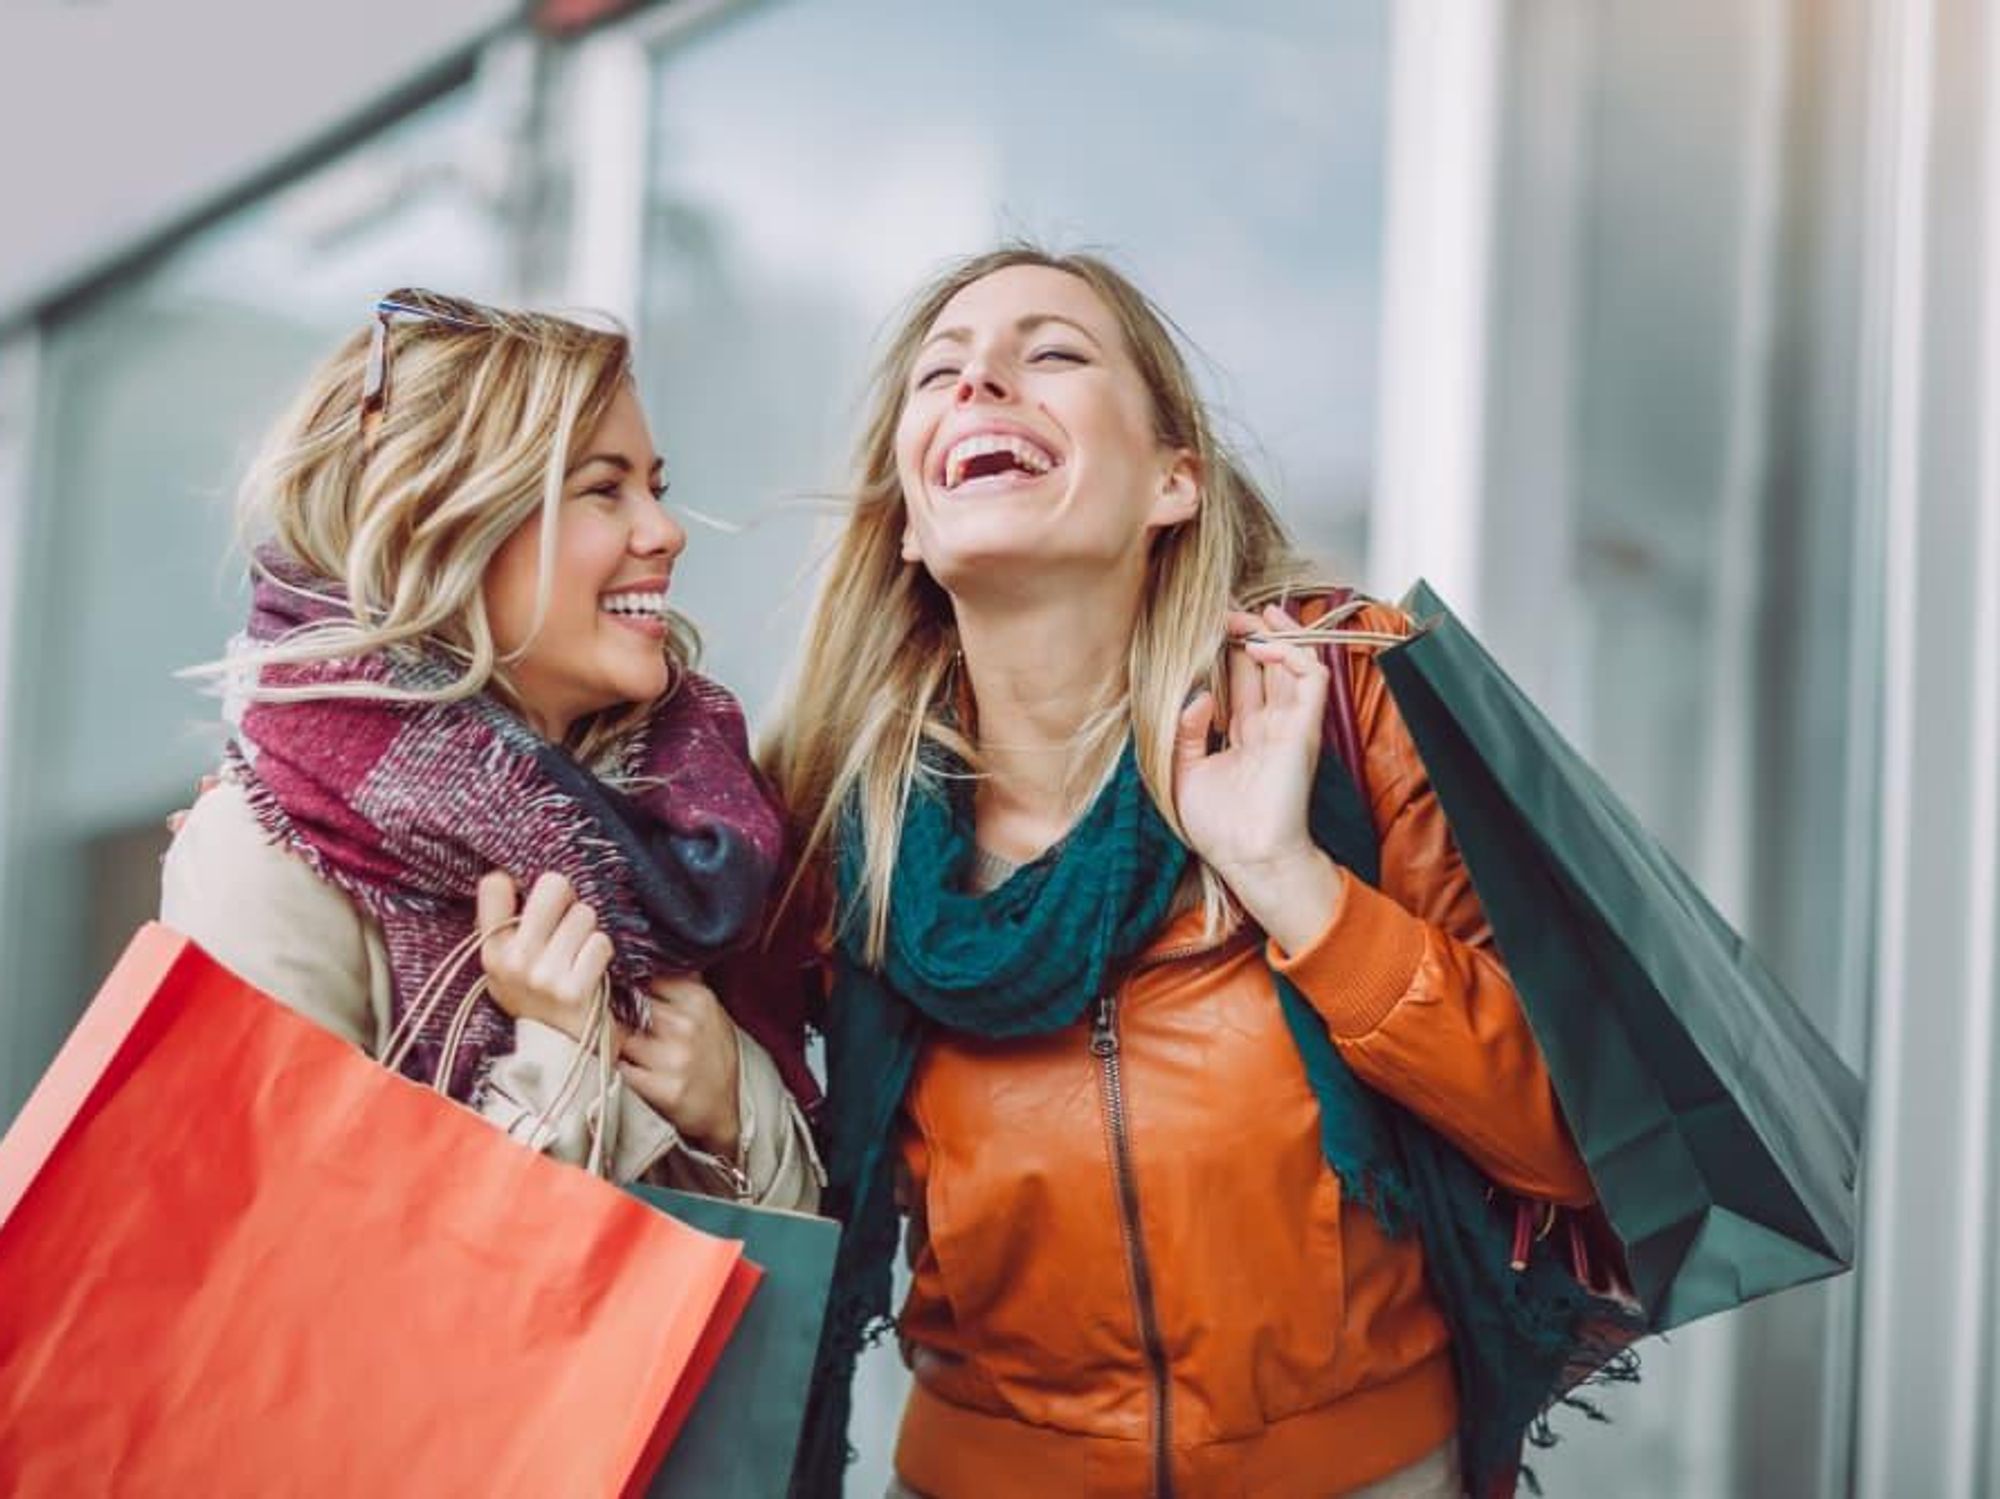 Women laughing and shopping